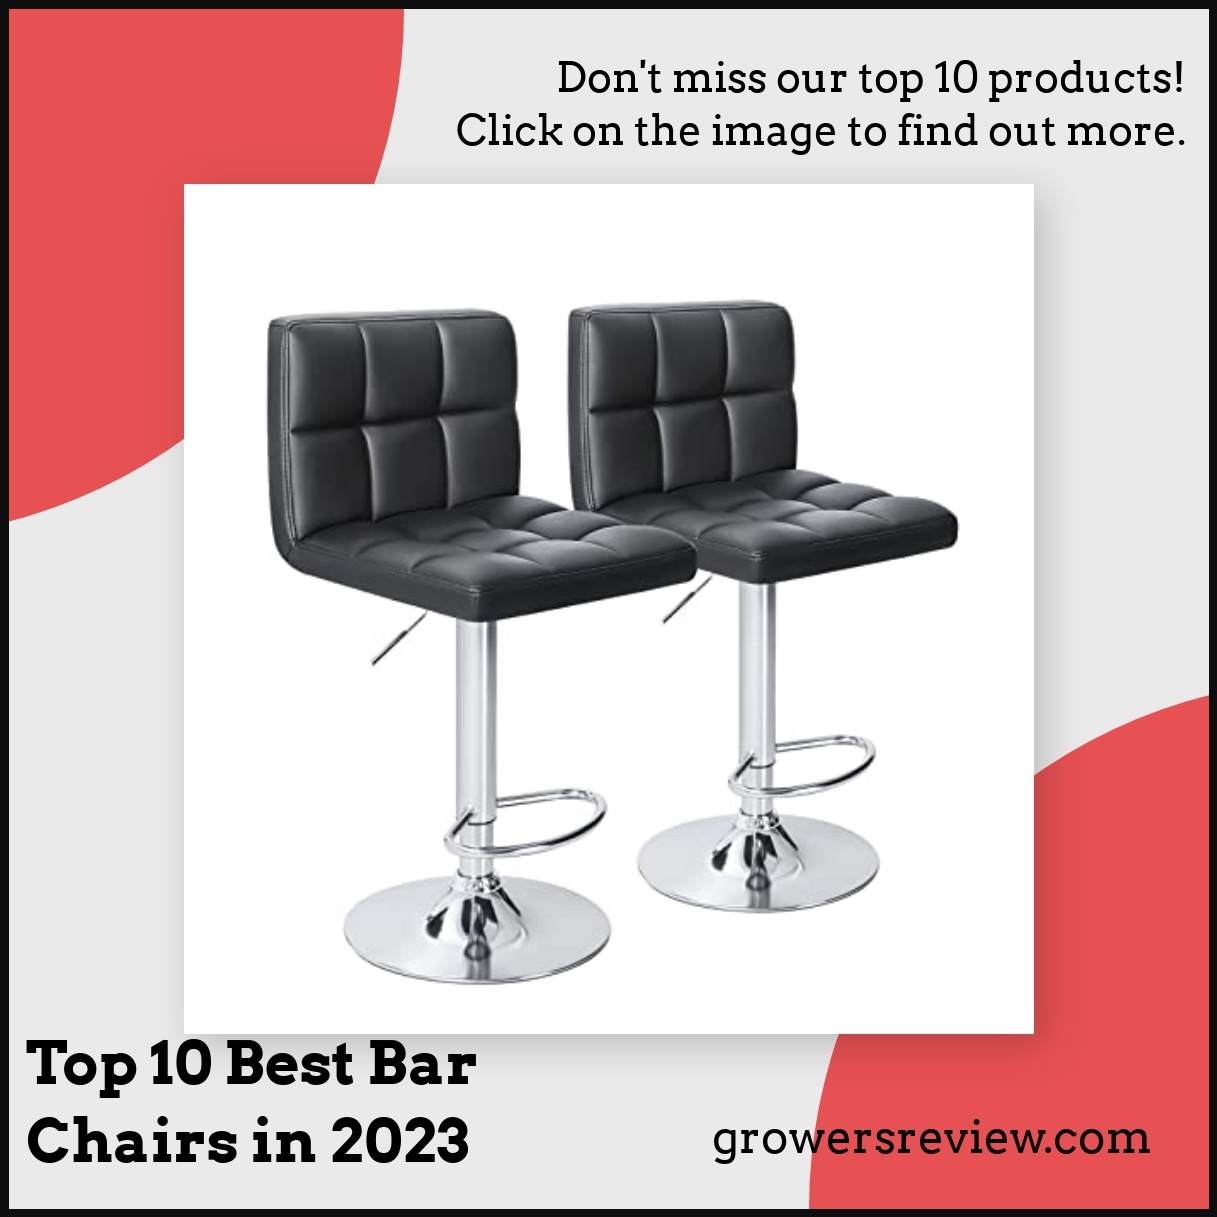 Top 10 Best Bar Chairs in 2023